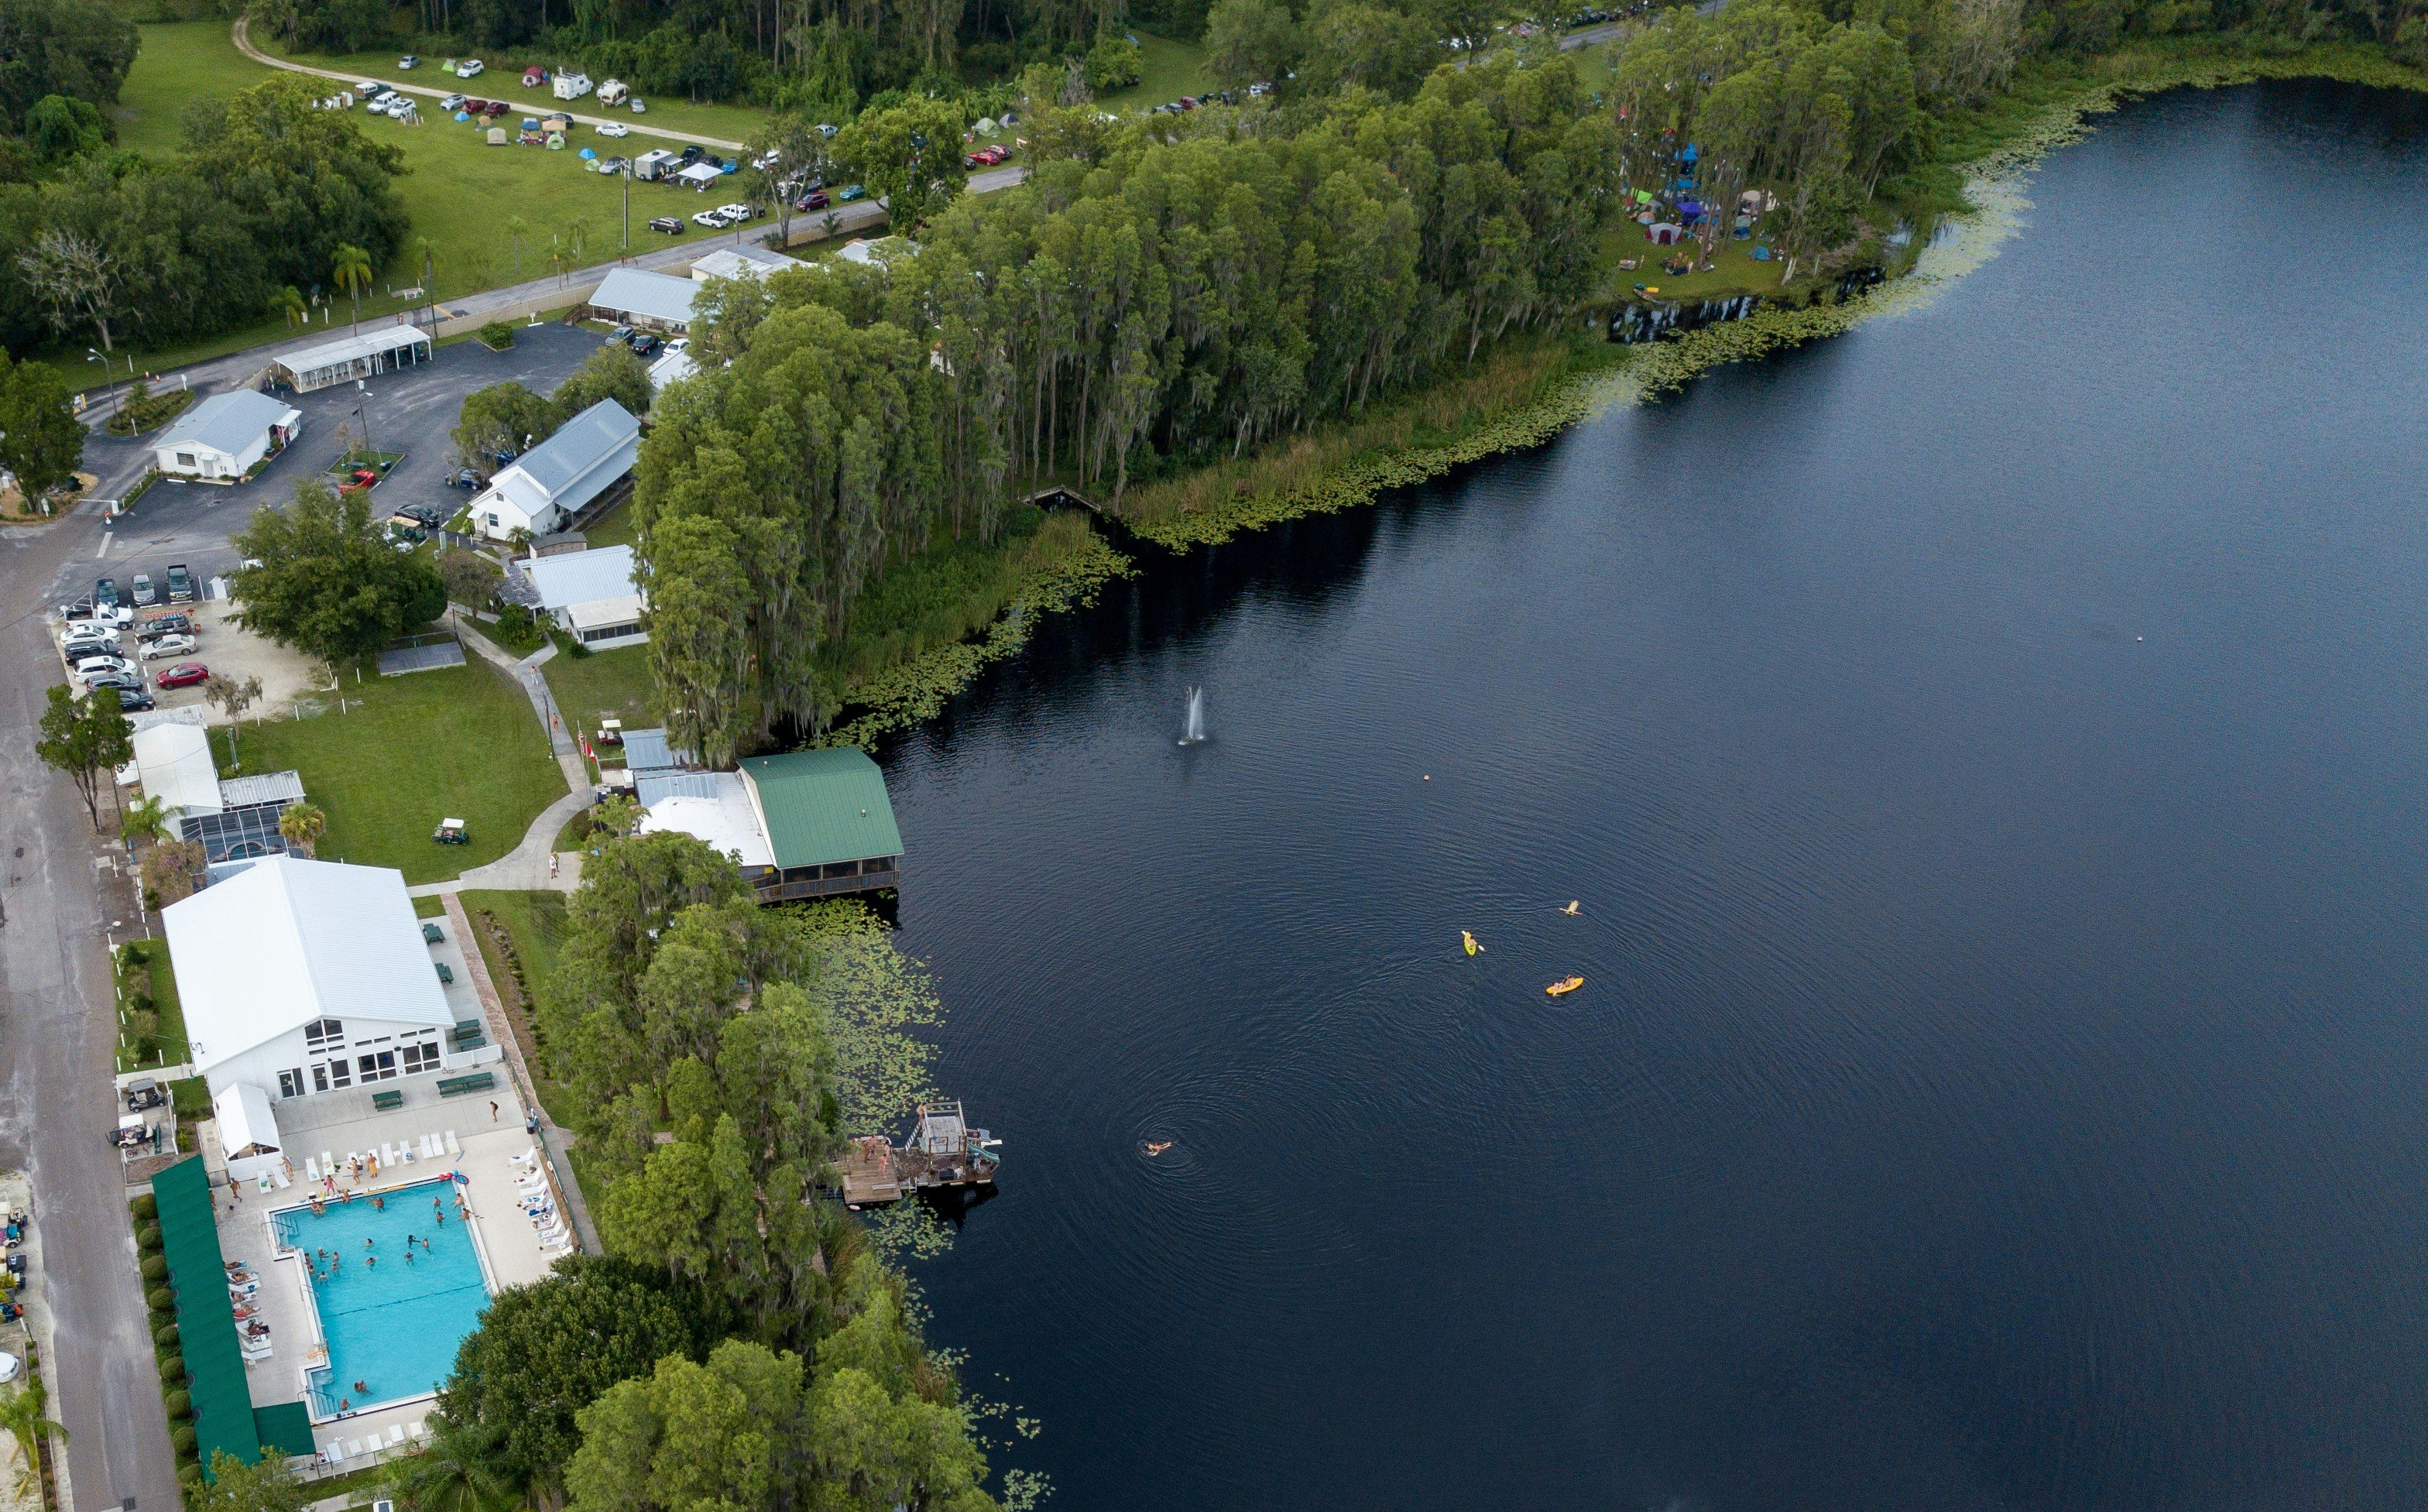 An aerial shot of the Lake Como Resort in Florida. On the left side of the frame, a light blue pool contrasts with the dark blue lake that takes up most of the photo. Tiny peach dots are nude swimmers. The white buildings with metal roofs sprawl out around the lake, the shore lined thickly with green trees. A campground with colorful tents appears amongst the foliage and two orange kayaks at in the middle of the lake.